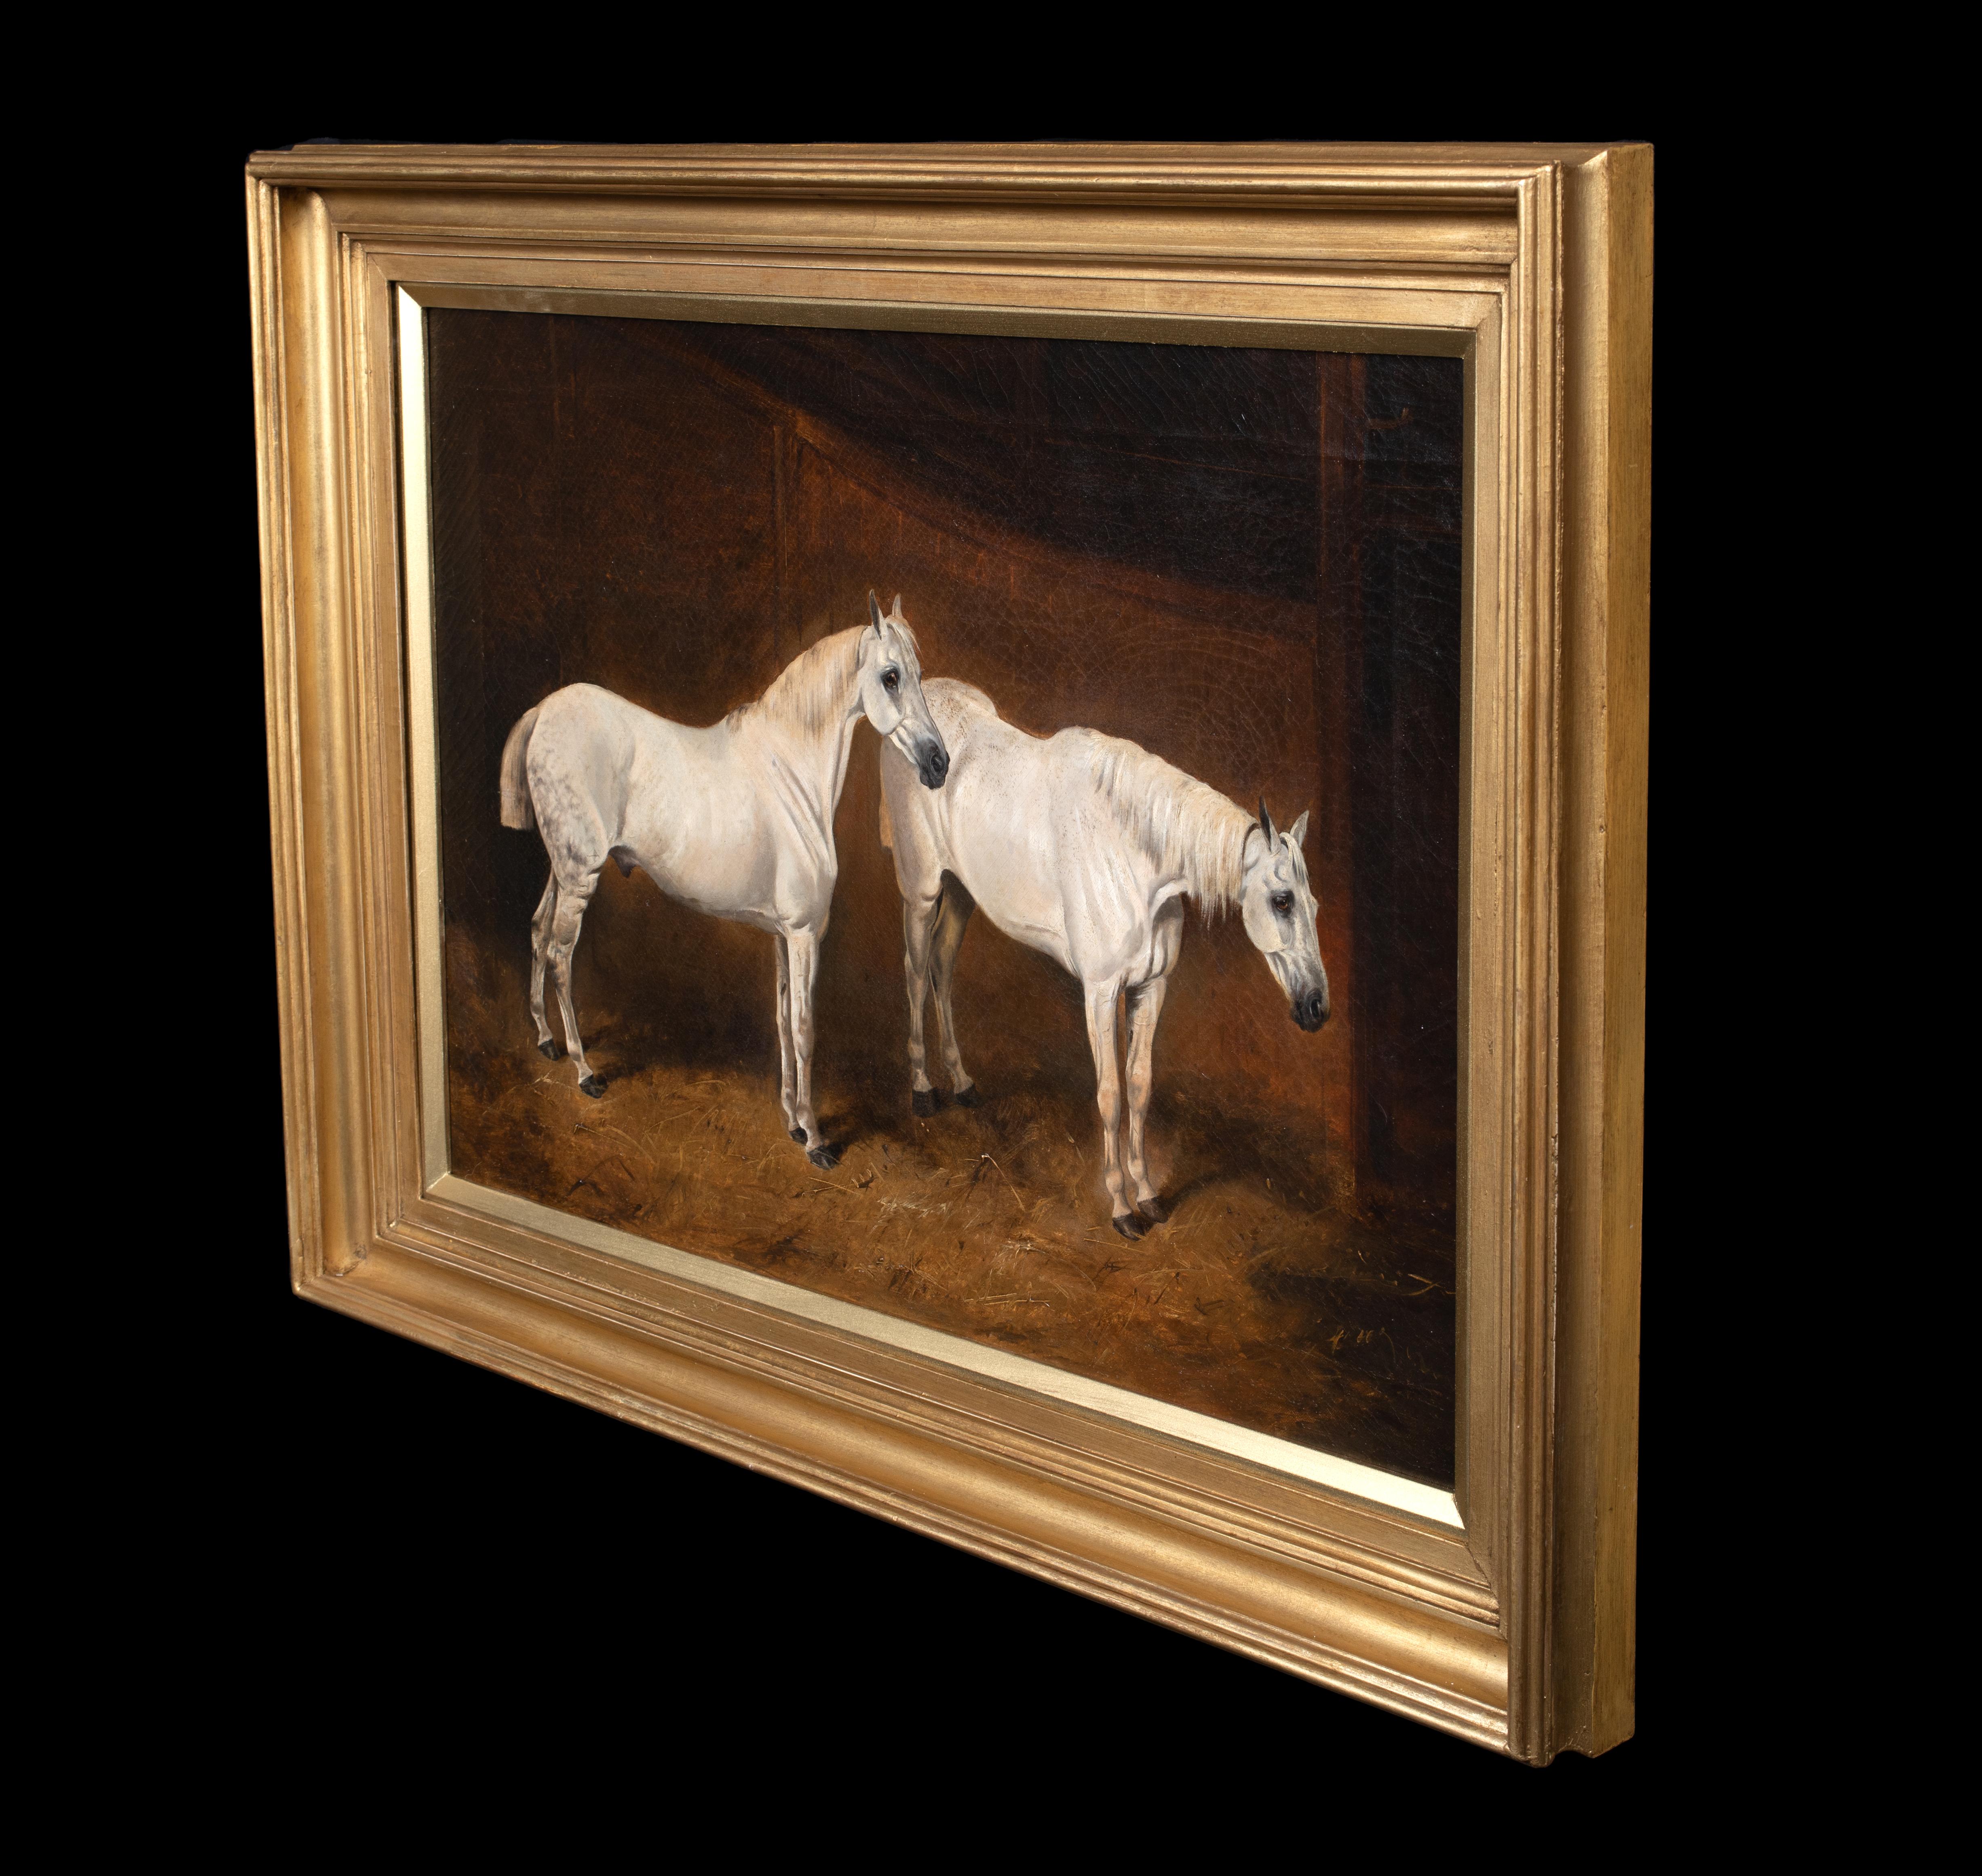 Two White Horses In A Stable, 19th Century 2